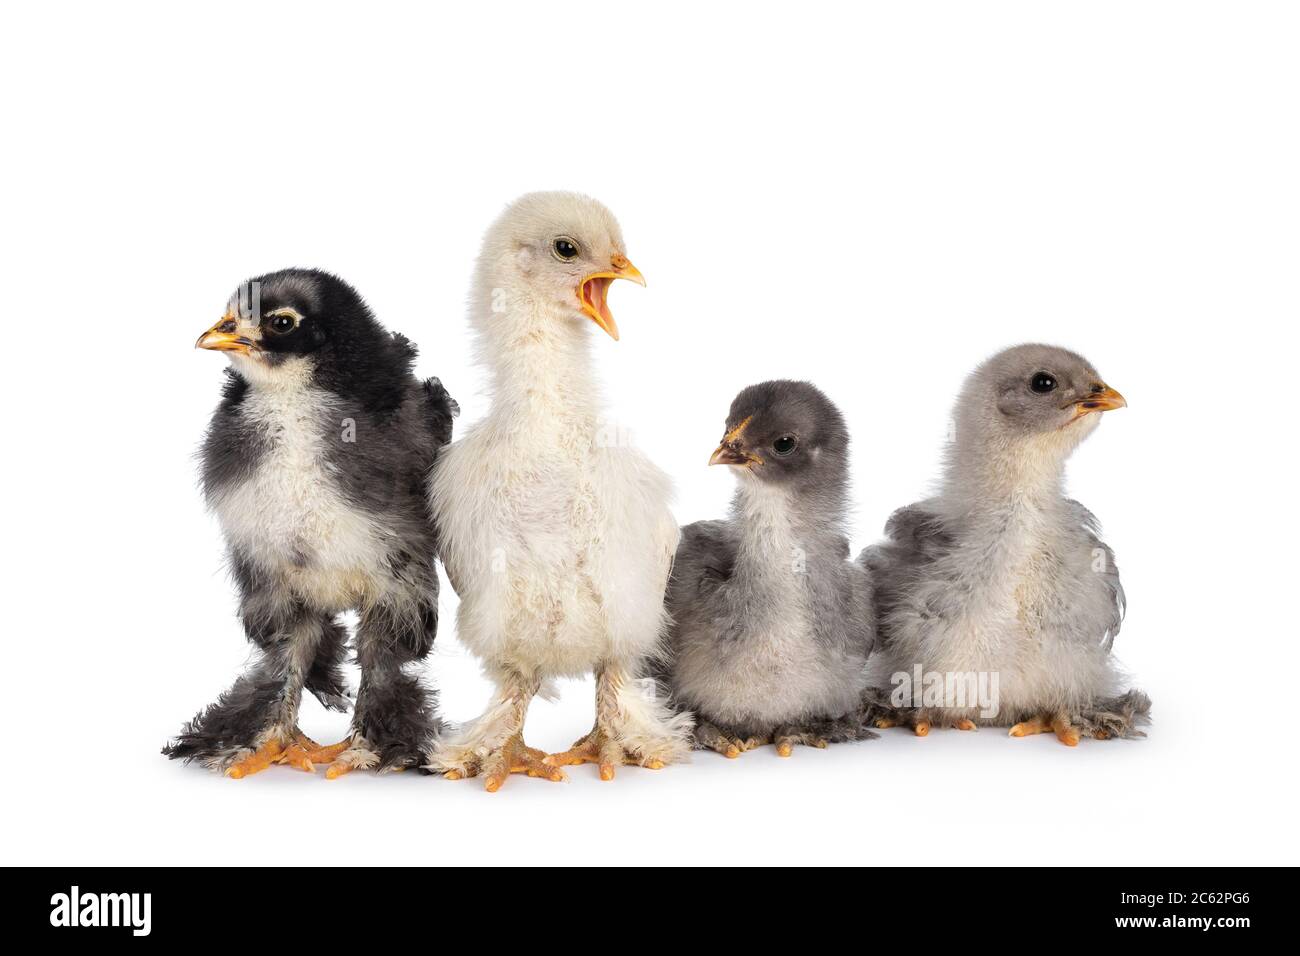 https://c8.alamy.com/comp/2C62PG6/group-of-4-multi-colored-baby-brahma-chickens-sitting-together-isolated-on-a-white-background-2C62PG6.jpg